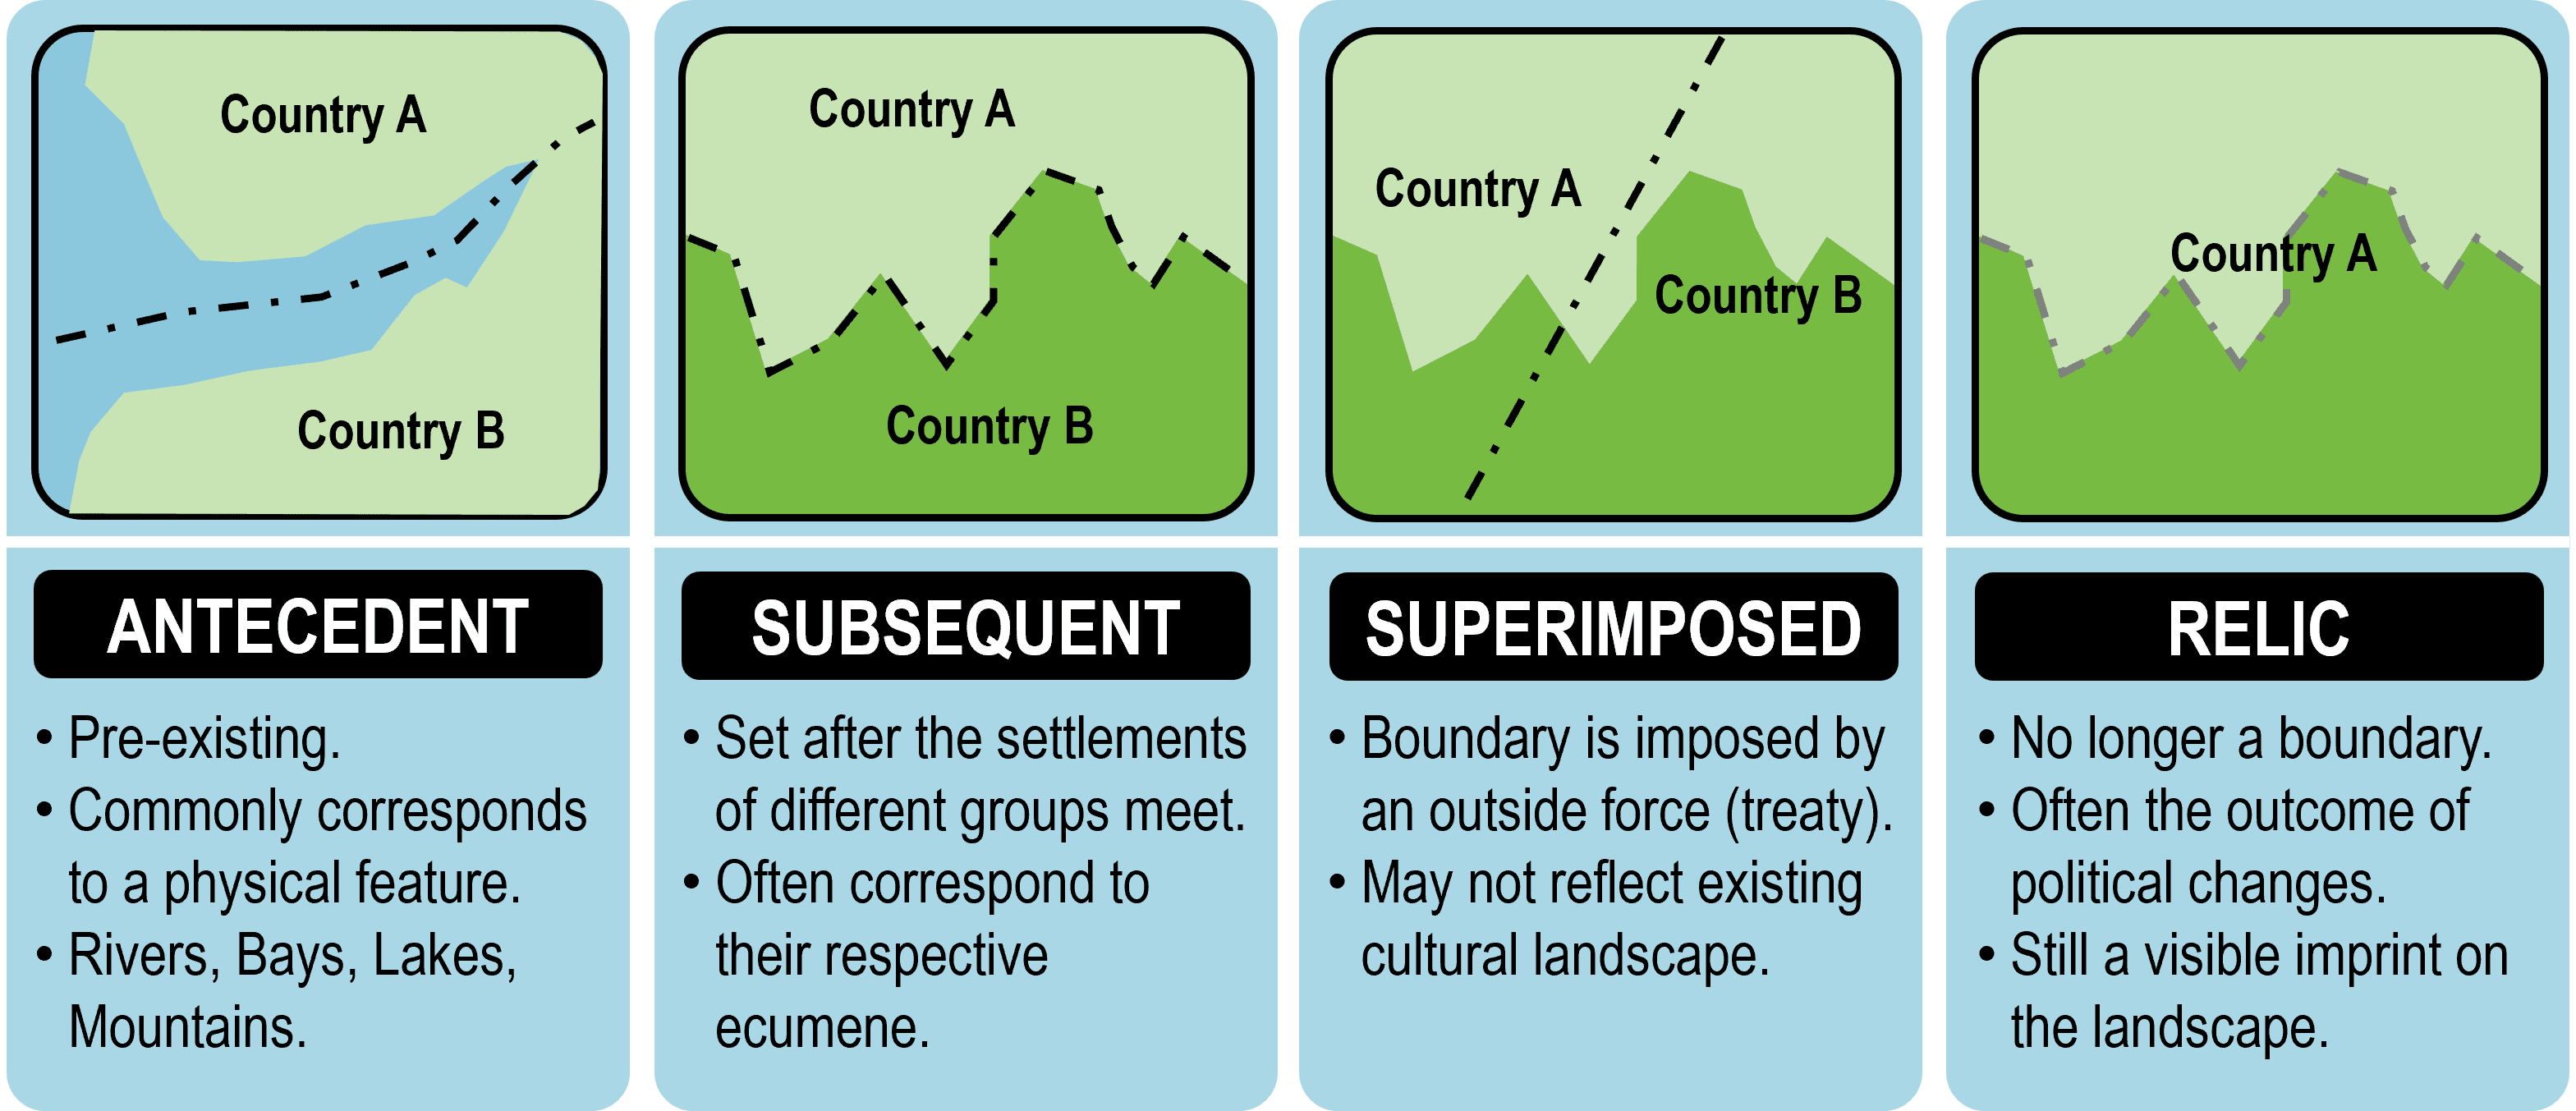 Is a Consequent Boundary Physical or Cultural?